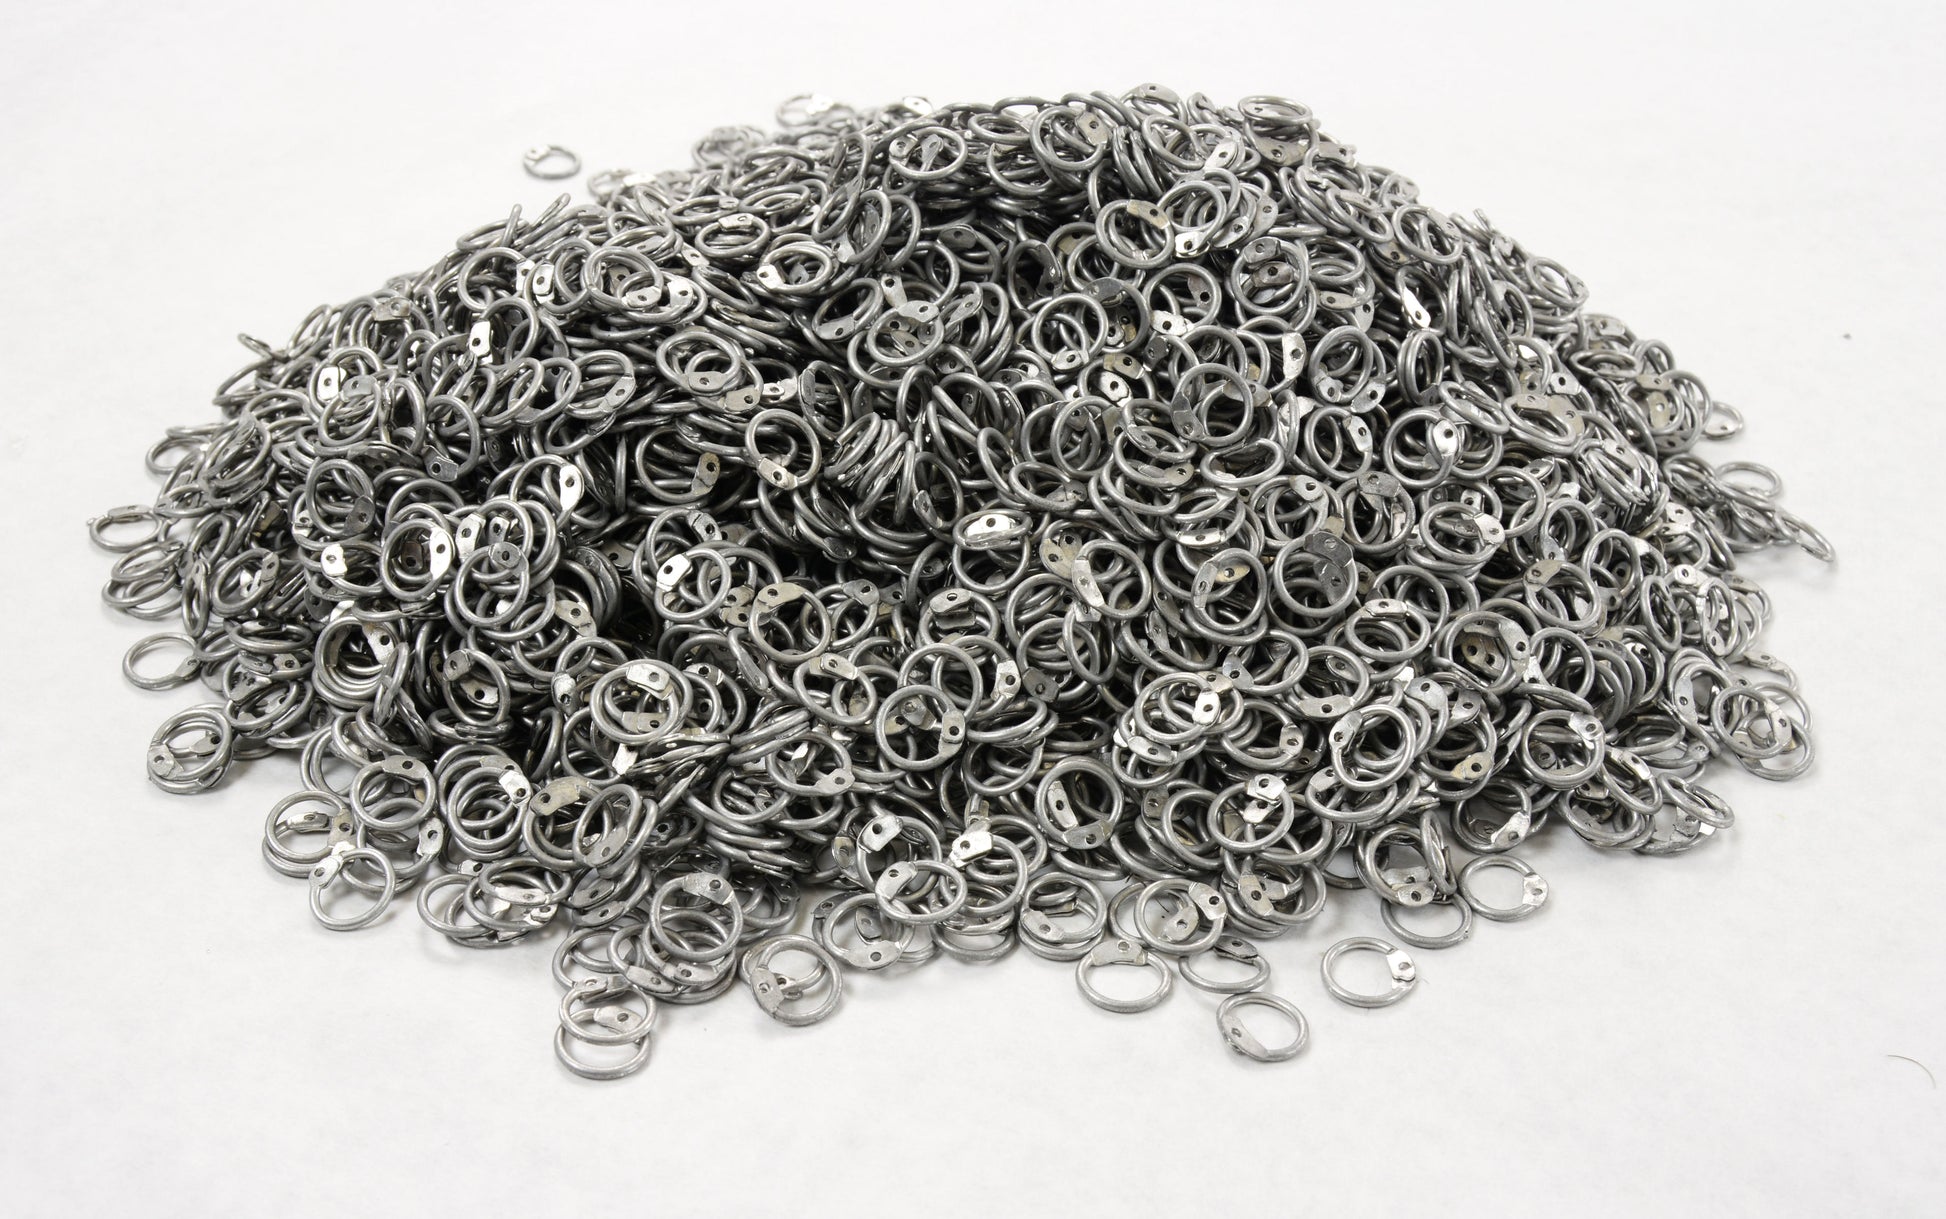 DRNA 1 kg Loose Aluminum Chainmail Rings - Round Ring with Rivets